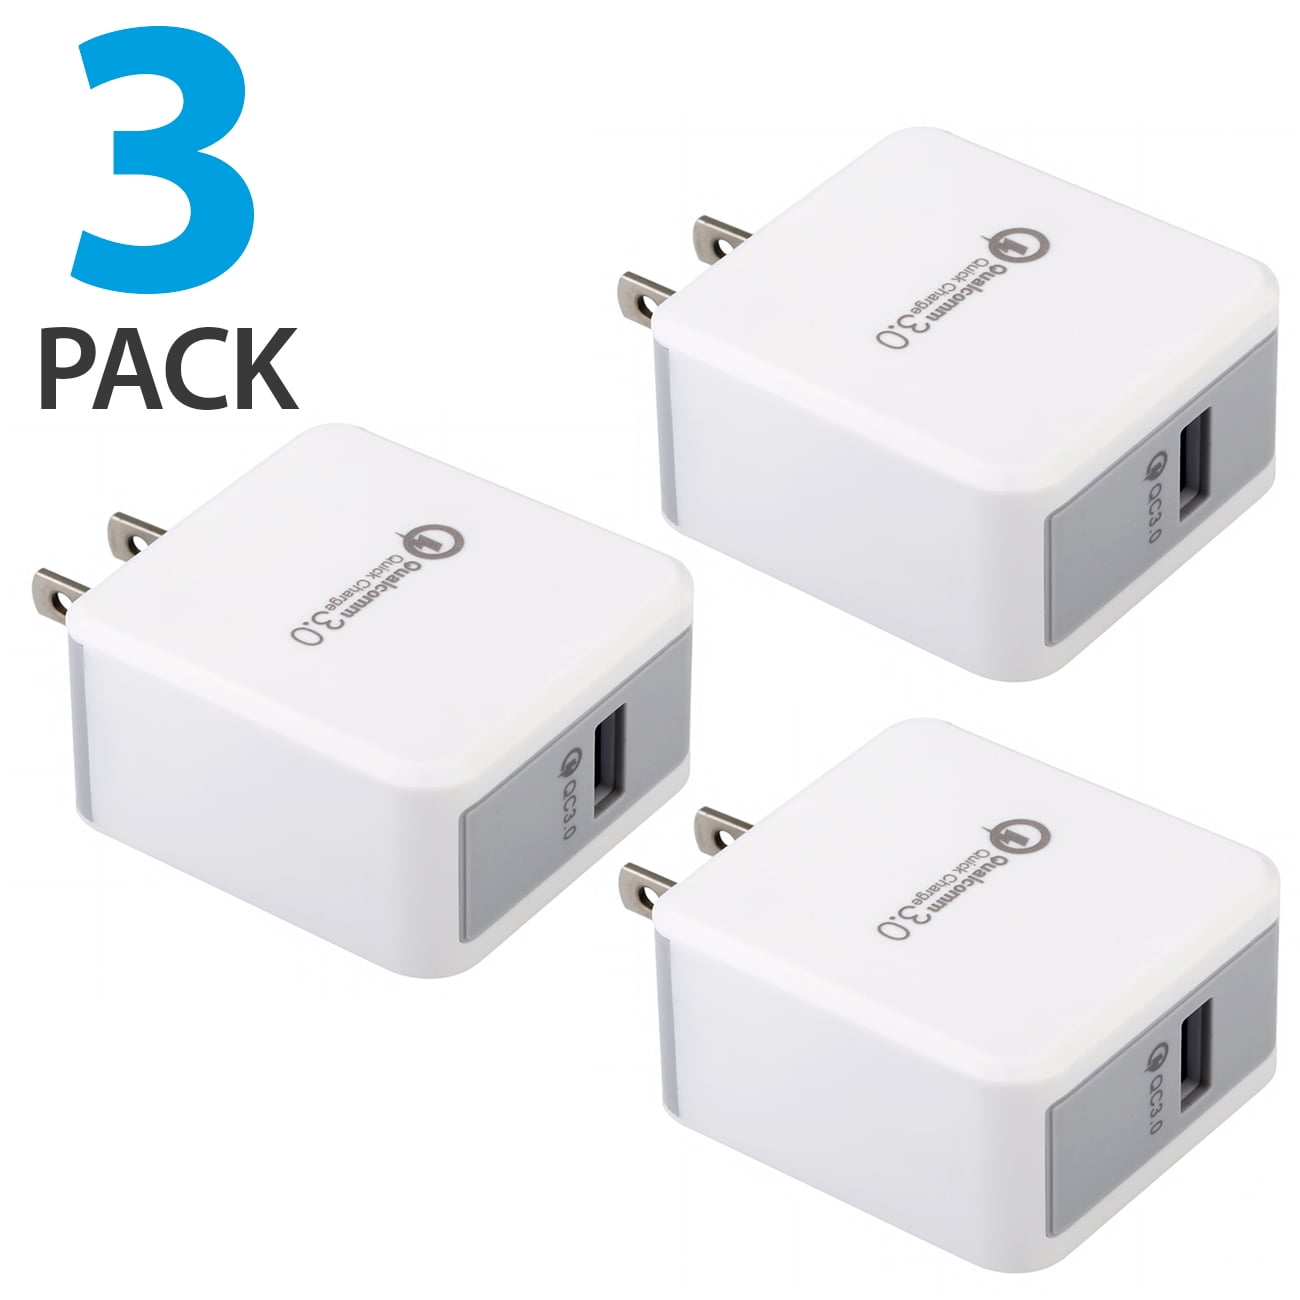 2 Port 35W Kfz ladeadapter schnelllader für iPhone X/Xs/Xr/Xs Max LG Huawei Ailun Qualcomm Quick Charge QC 3.0 Auto Ladegerät Adapter Galaxy S10/S9/S9/S8 Plus Note 5 4 3 8 7 6 6s Powerbank usw. 